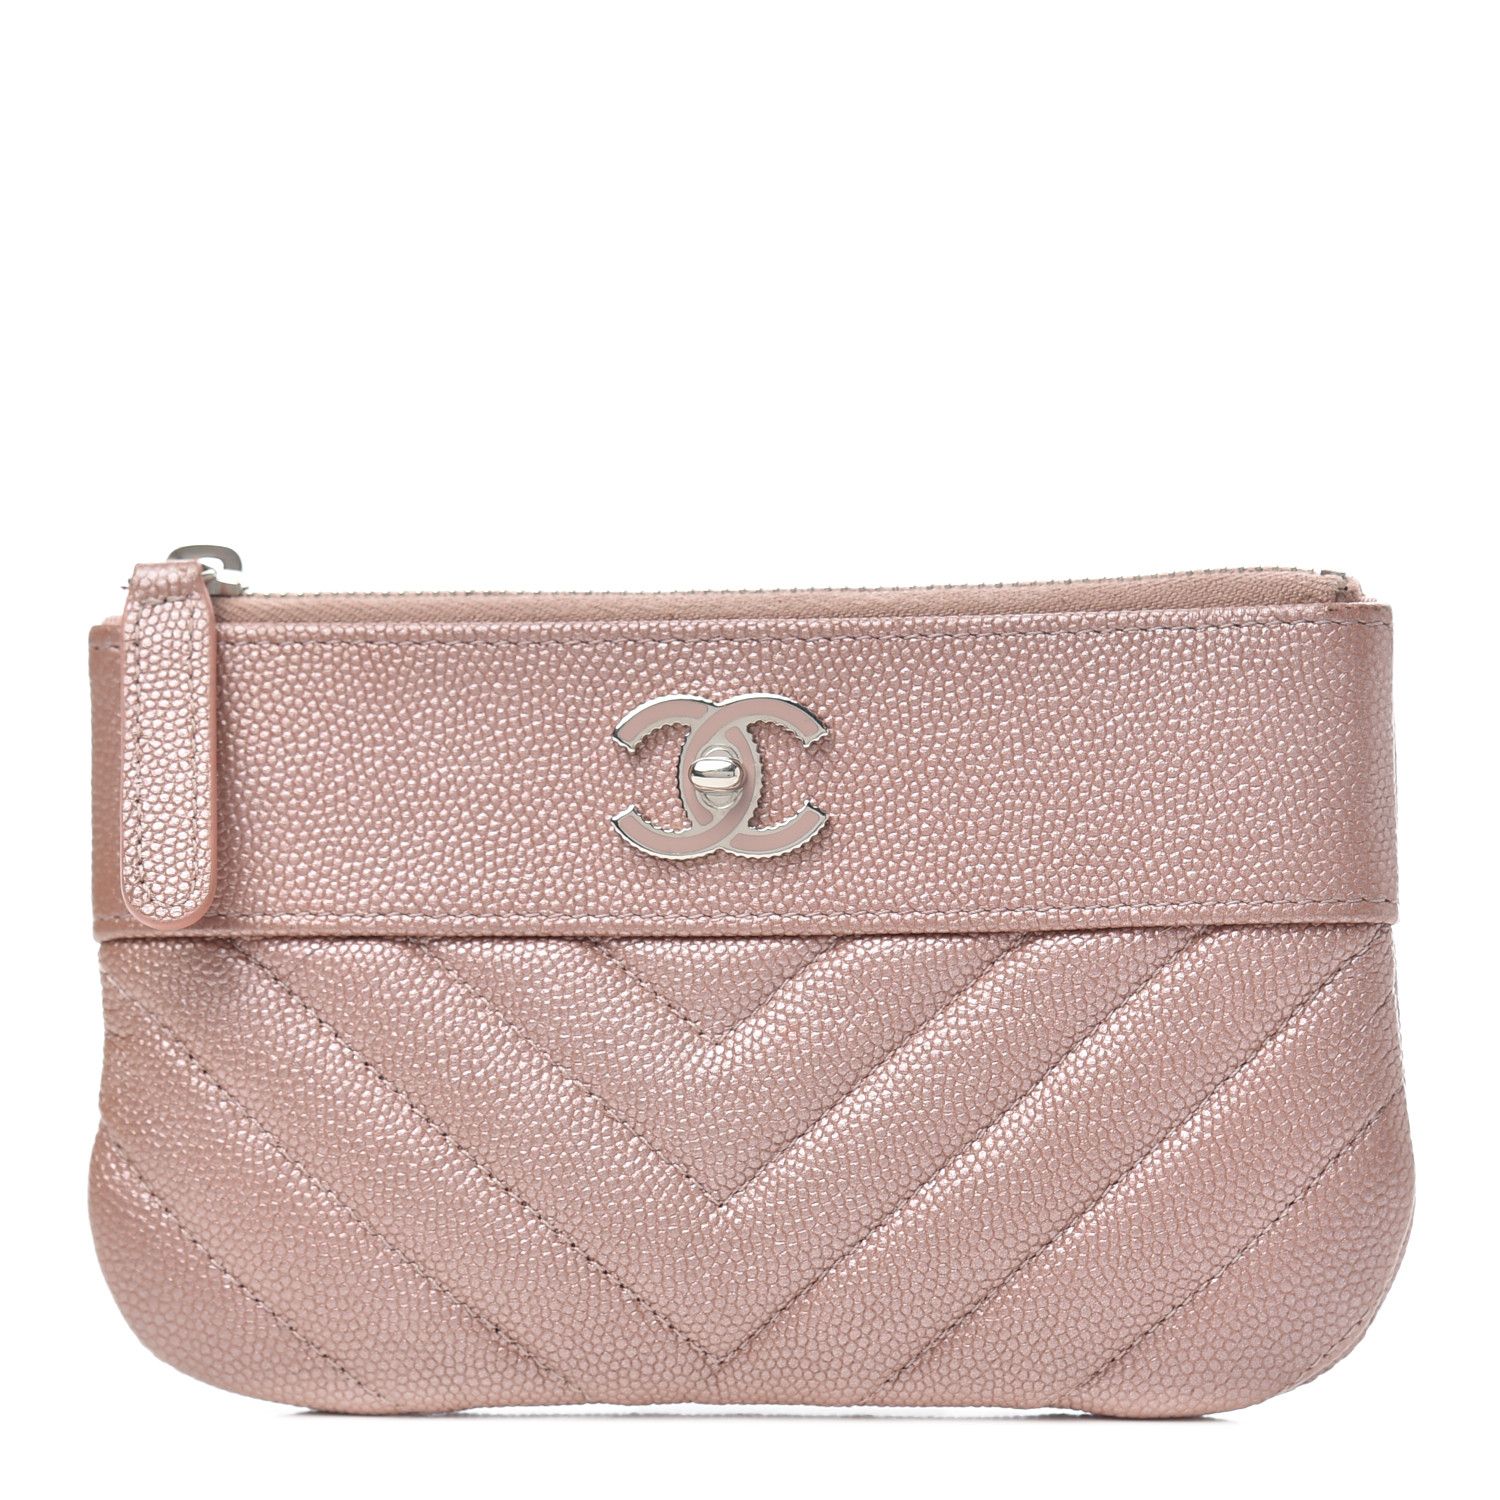 CHANEL

Metallic Caviar Chevron Quilted Small Vintage Mademoiselle Cosmetic Case Pink | Fashionphile